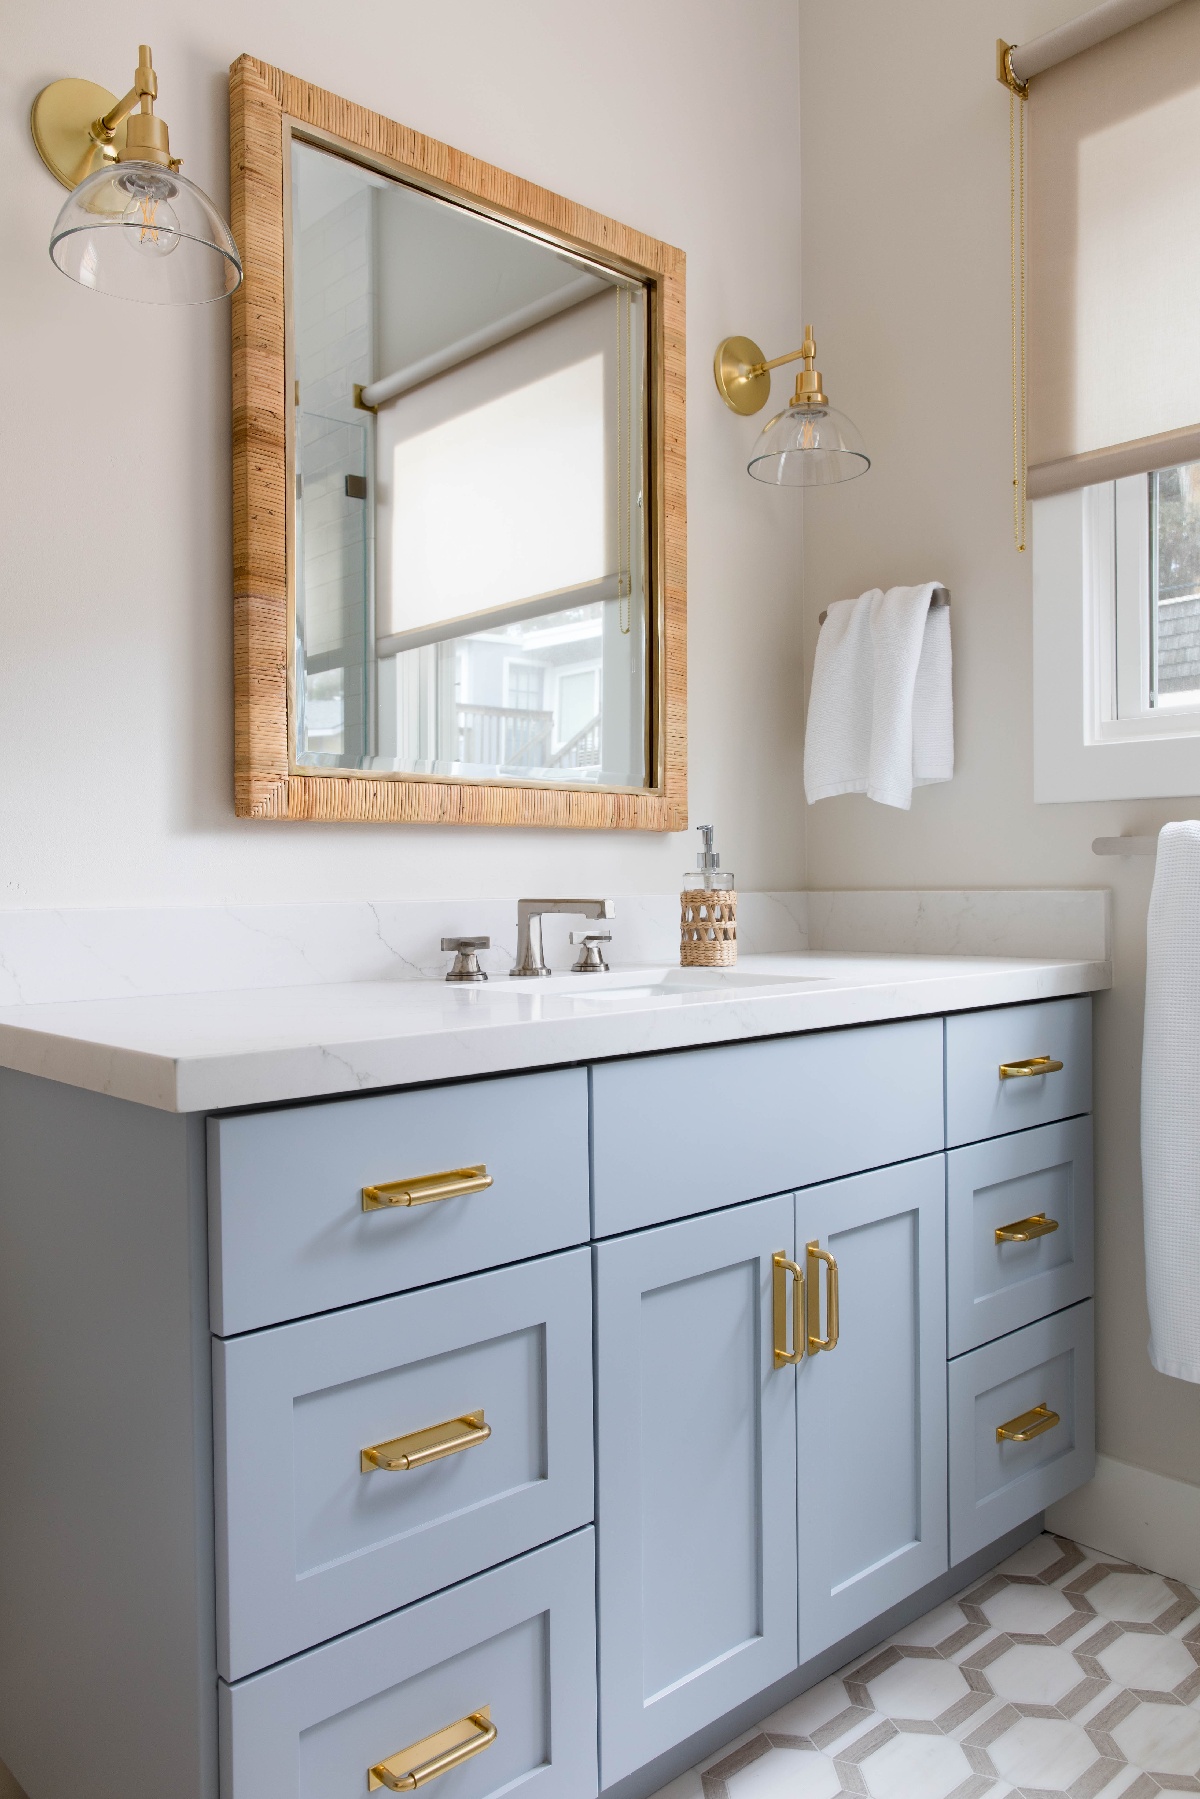 Bathroom sink with blue cabinetry finish, a marble countertop, and gold finishings on the cabinet handles